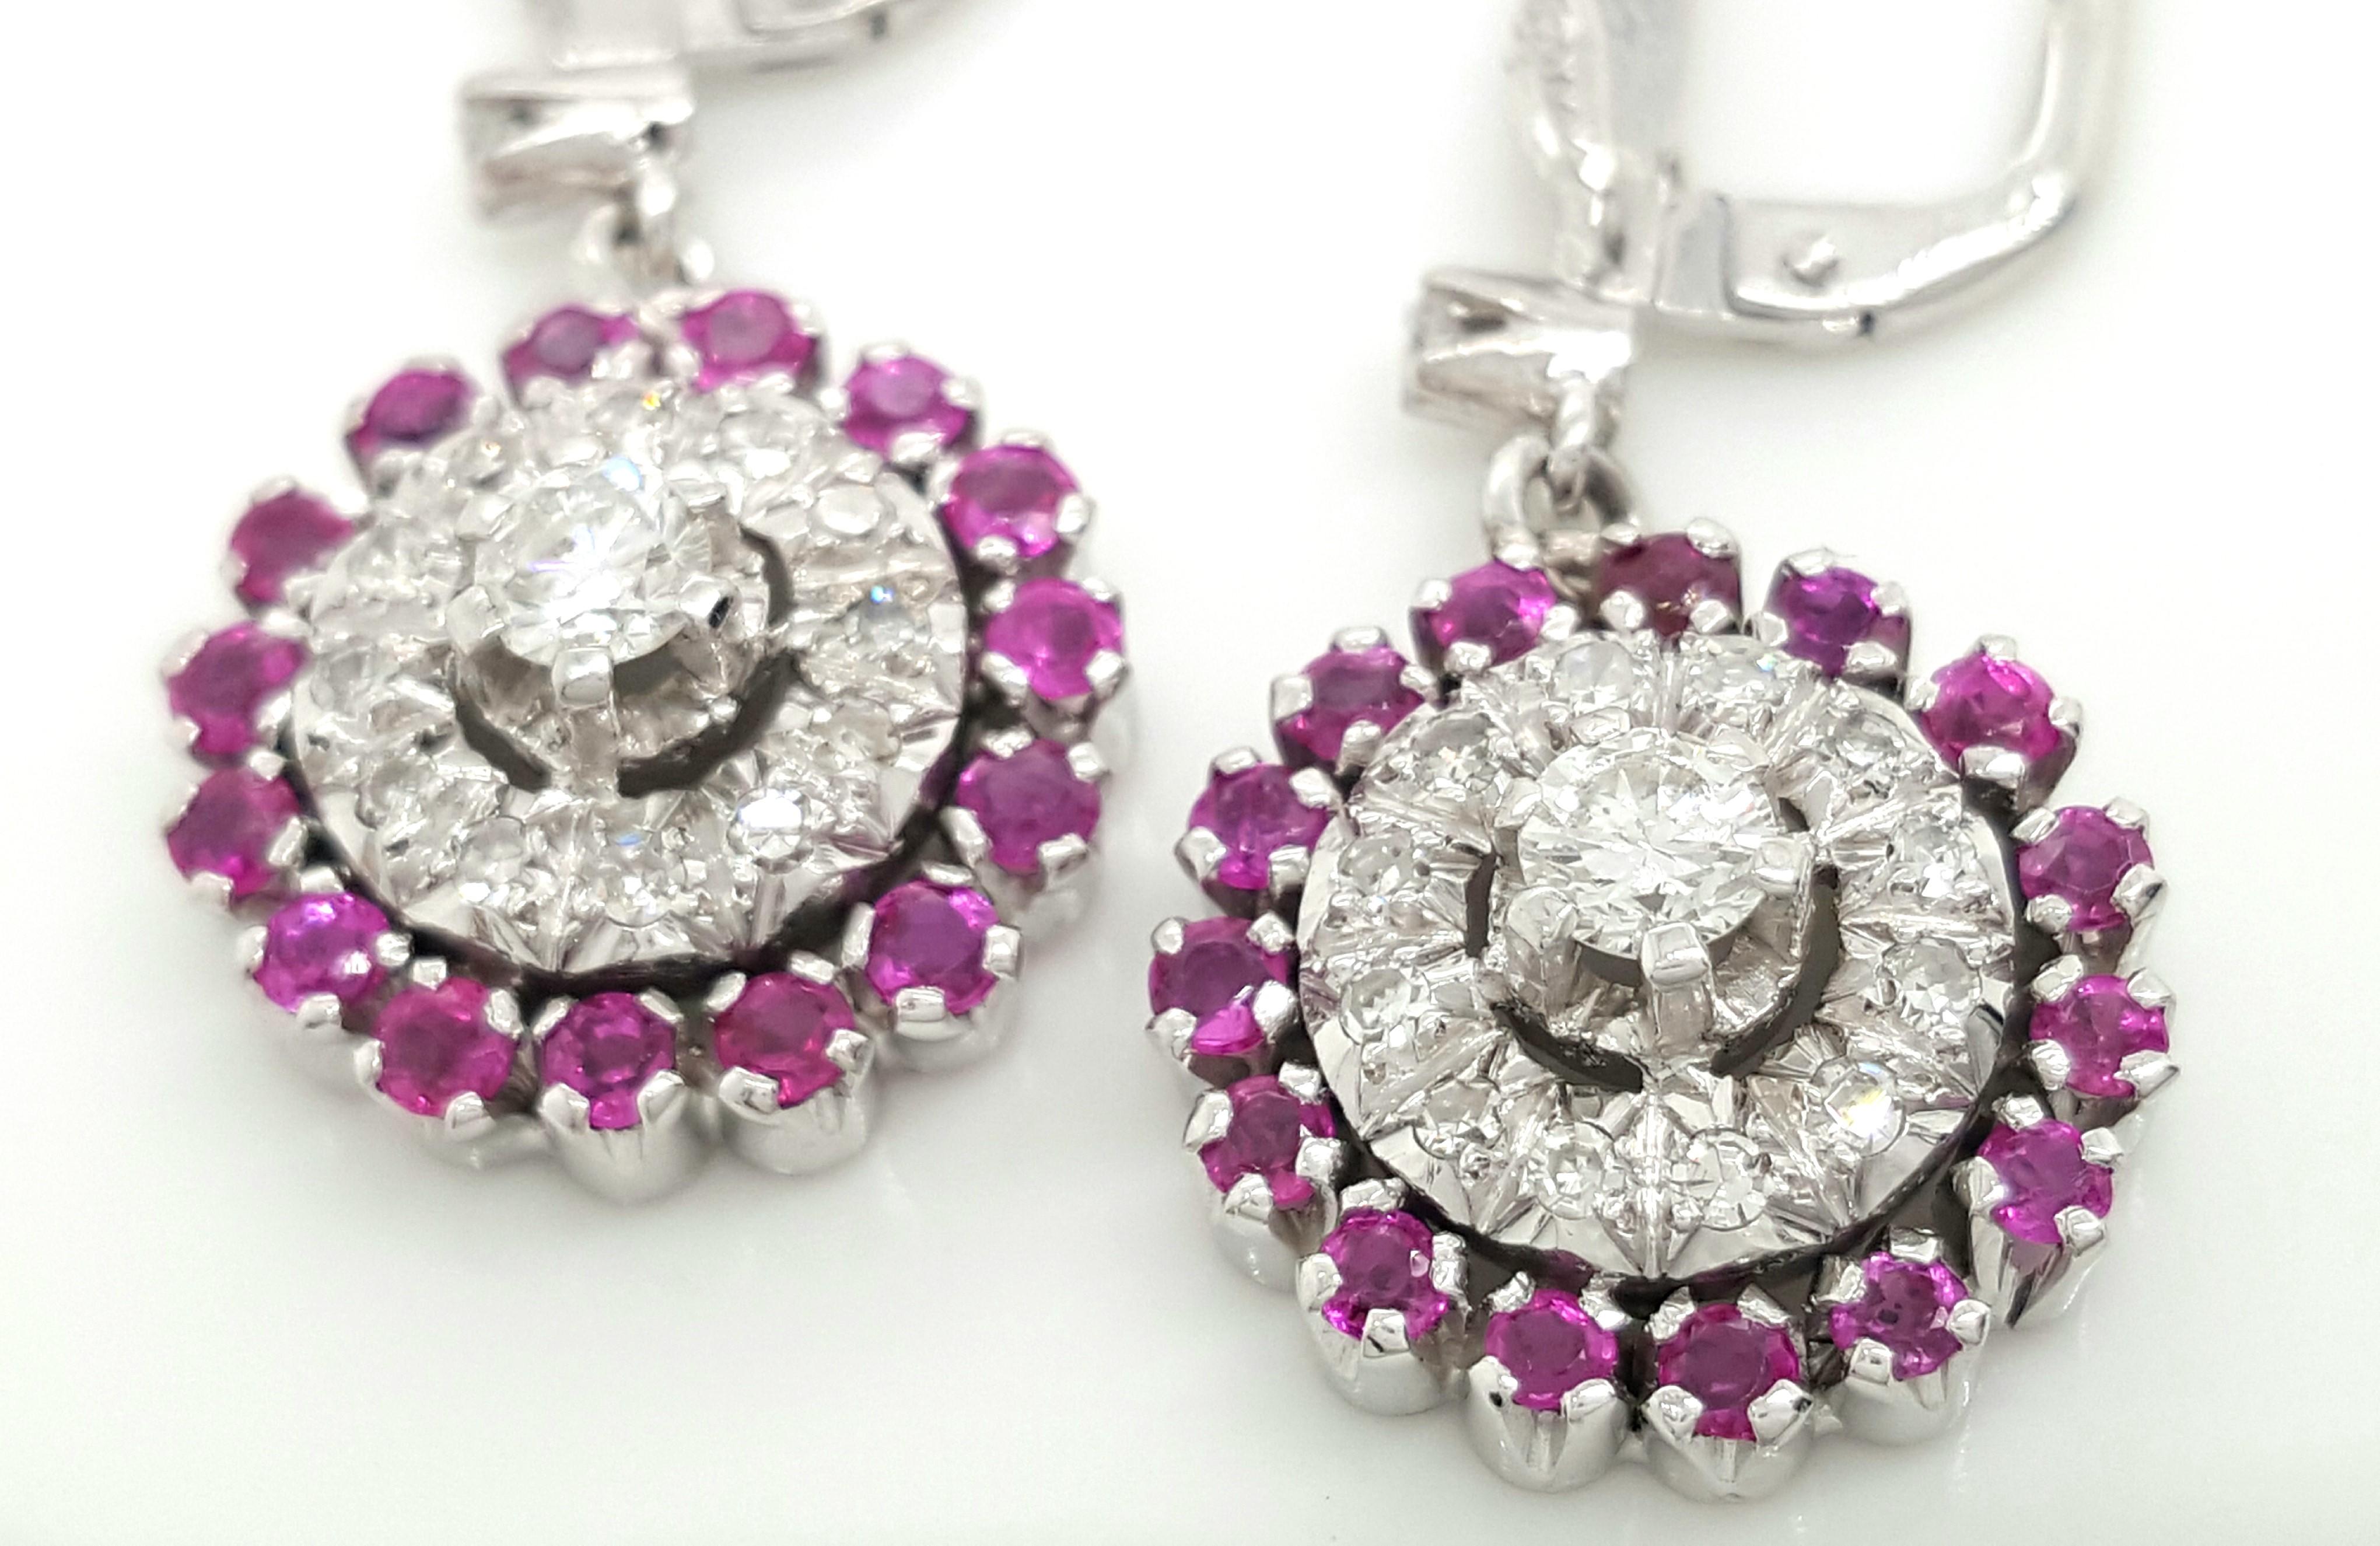 18 Karat White Gold Vintage Style Diamond and Ruby Double Halo Earrings For Sale 1